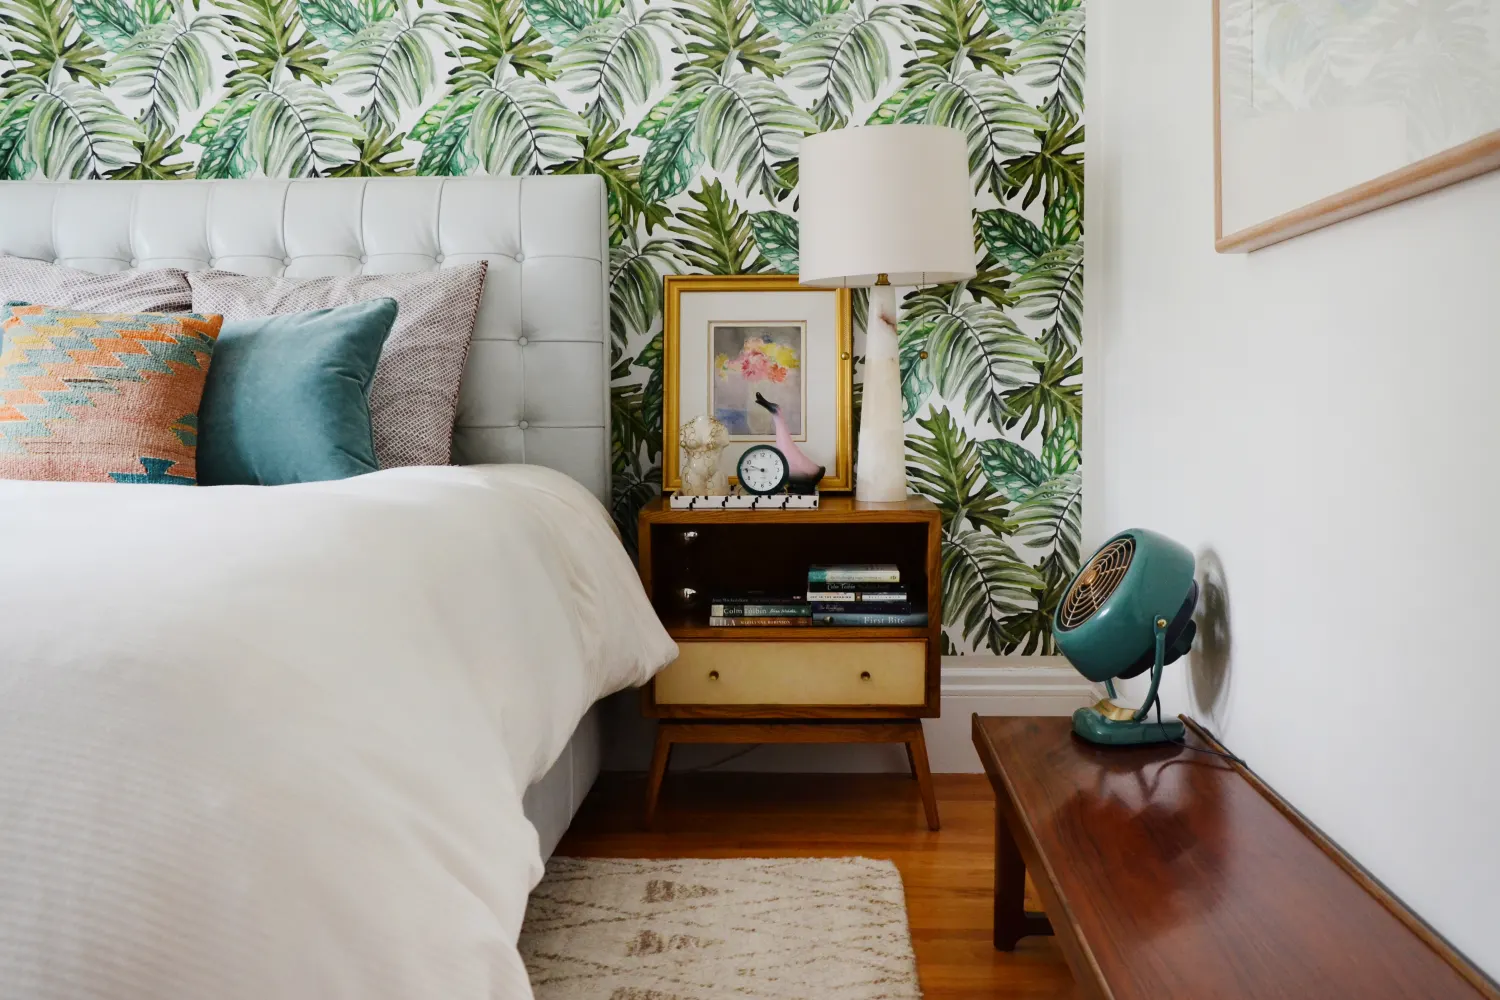 Tired Of The Way Your Bedroom Looks? Time To Bring These Affordable Changes!